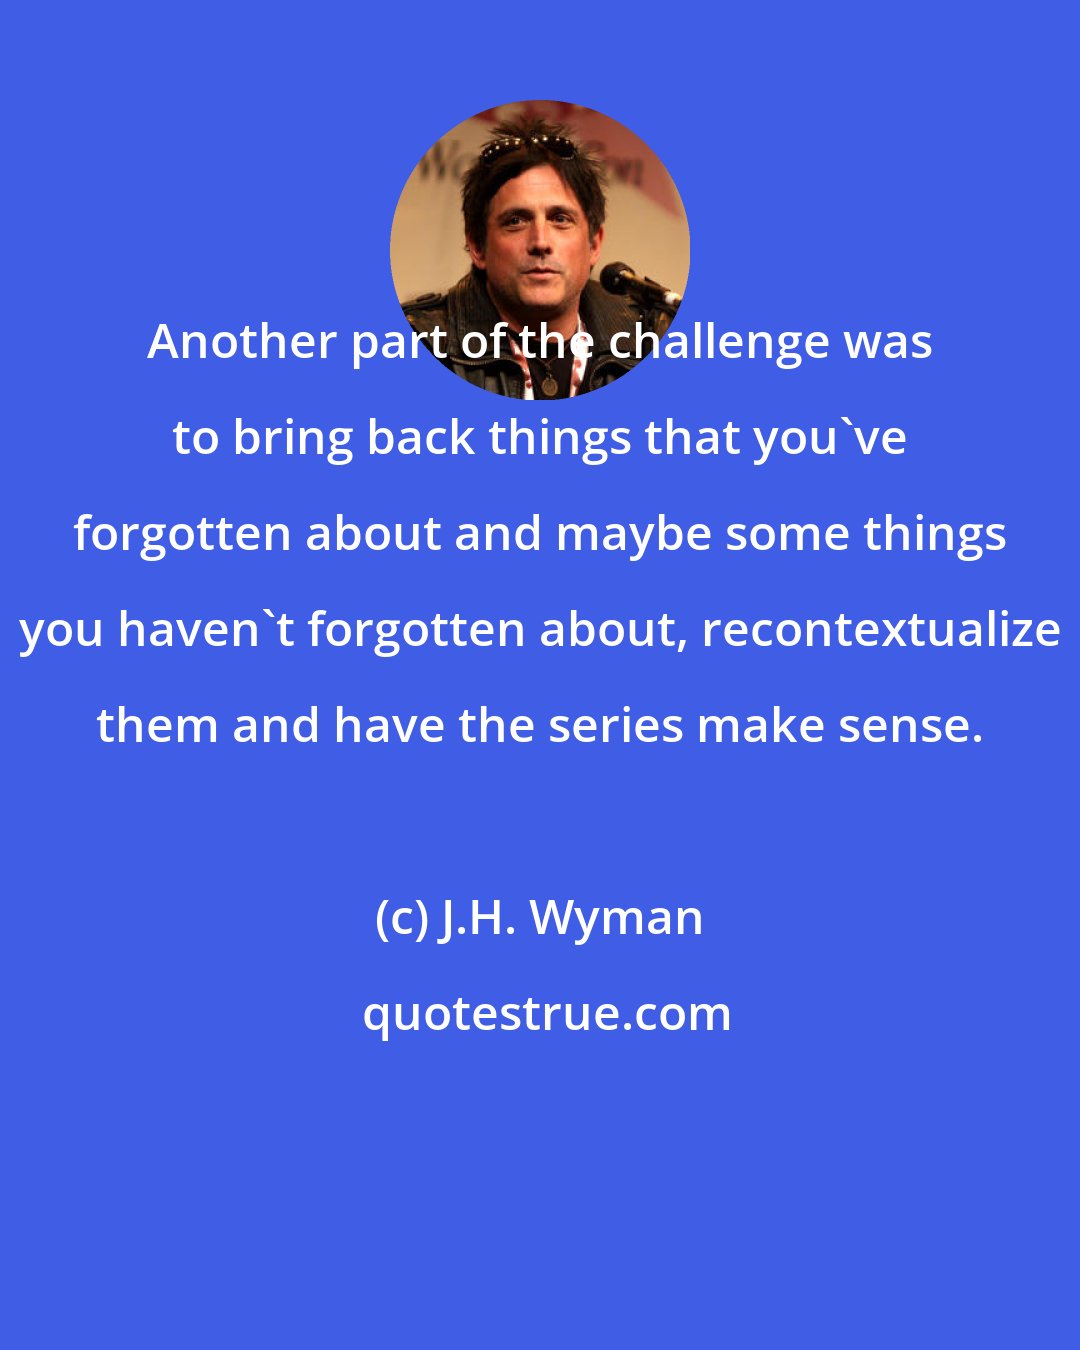 J.H. Wyman: Another part of the challenge was to bring back things that you've forgotten about and maybe some things you haven't forgotten about, recontextualize them and have the series make sense.